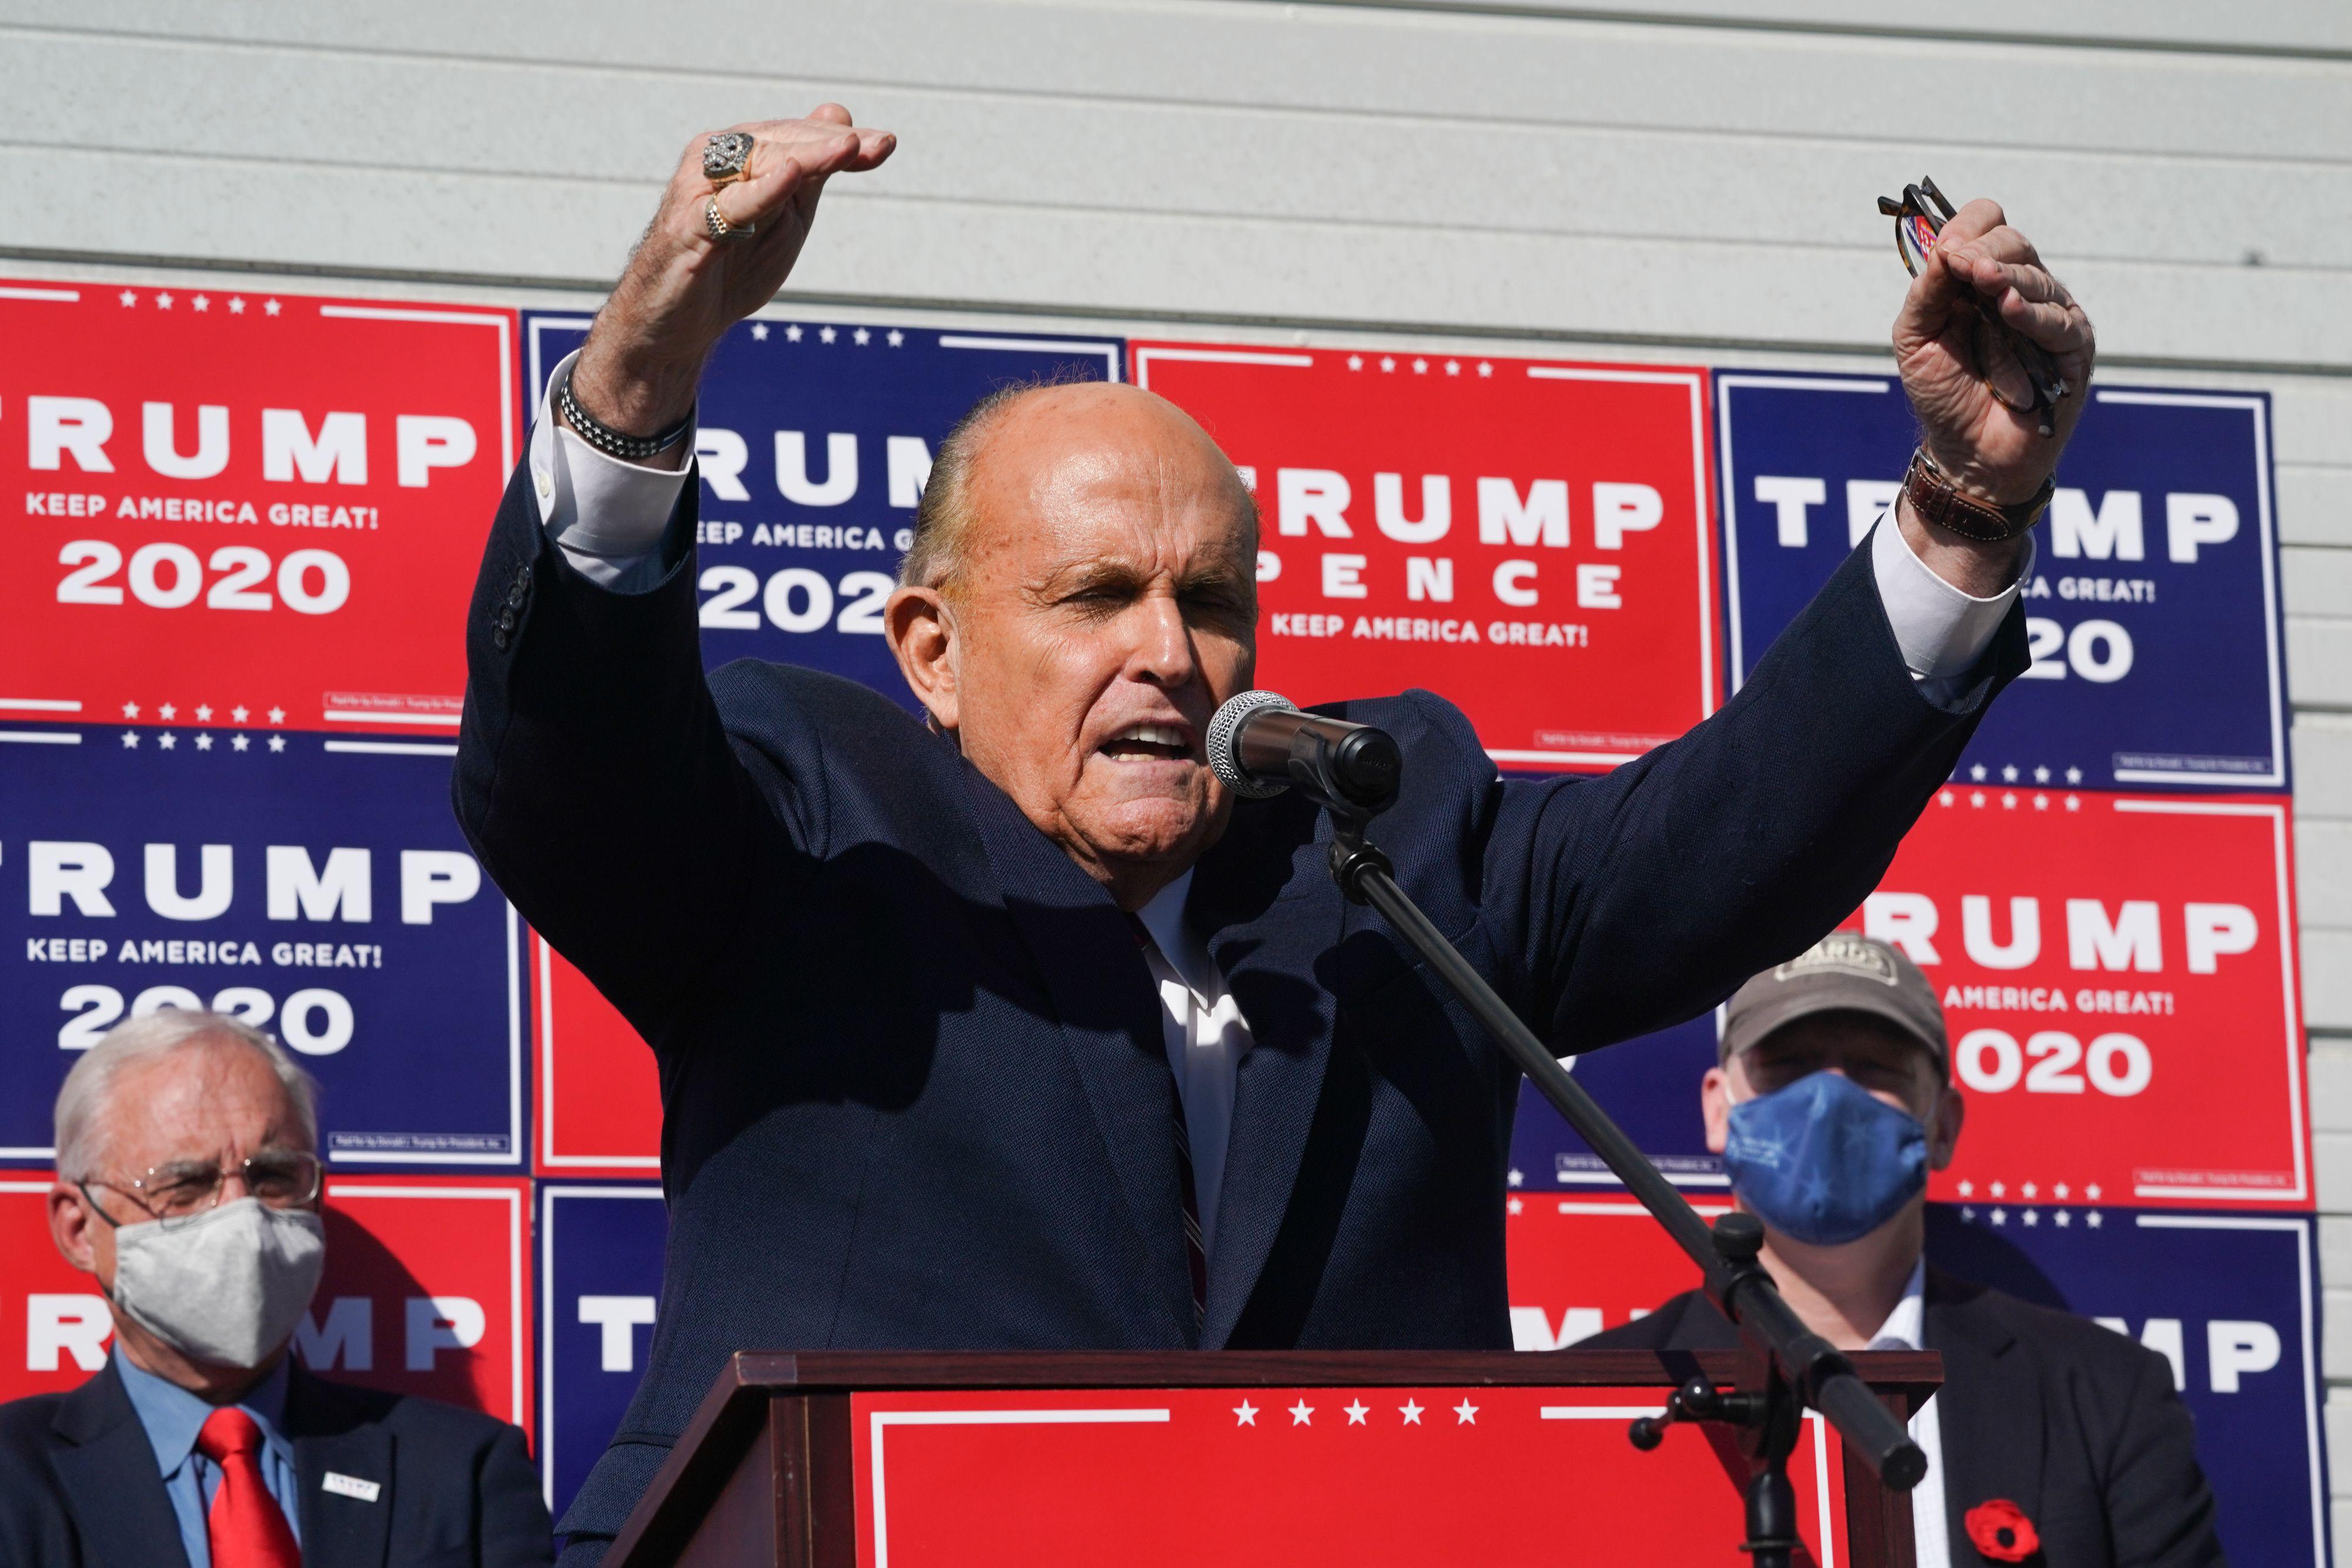 Giuliani stands at a podium in front of Trump 2020 signs and raises his hands, as two men stand in the background.